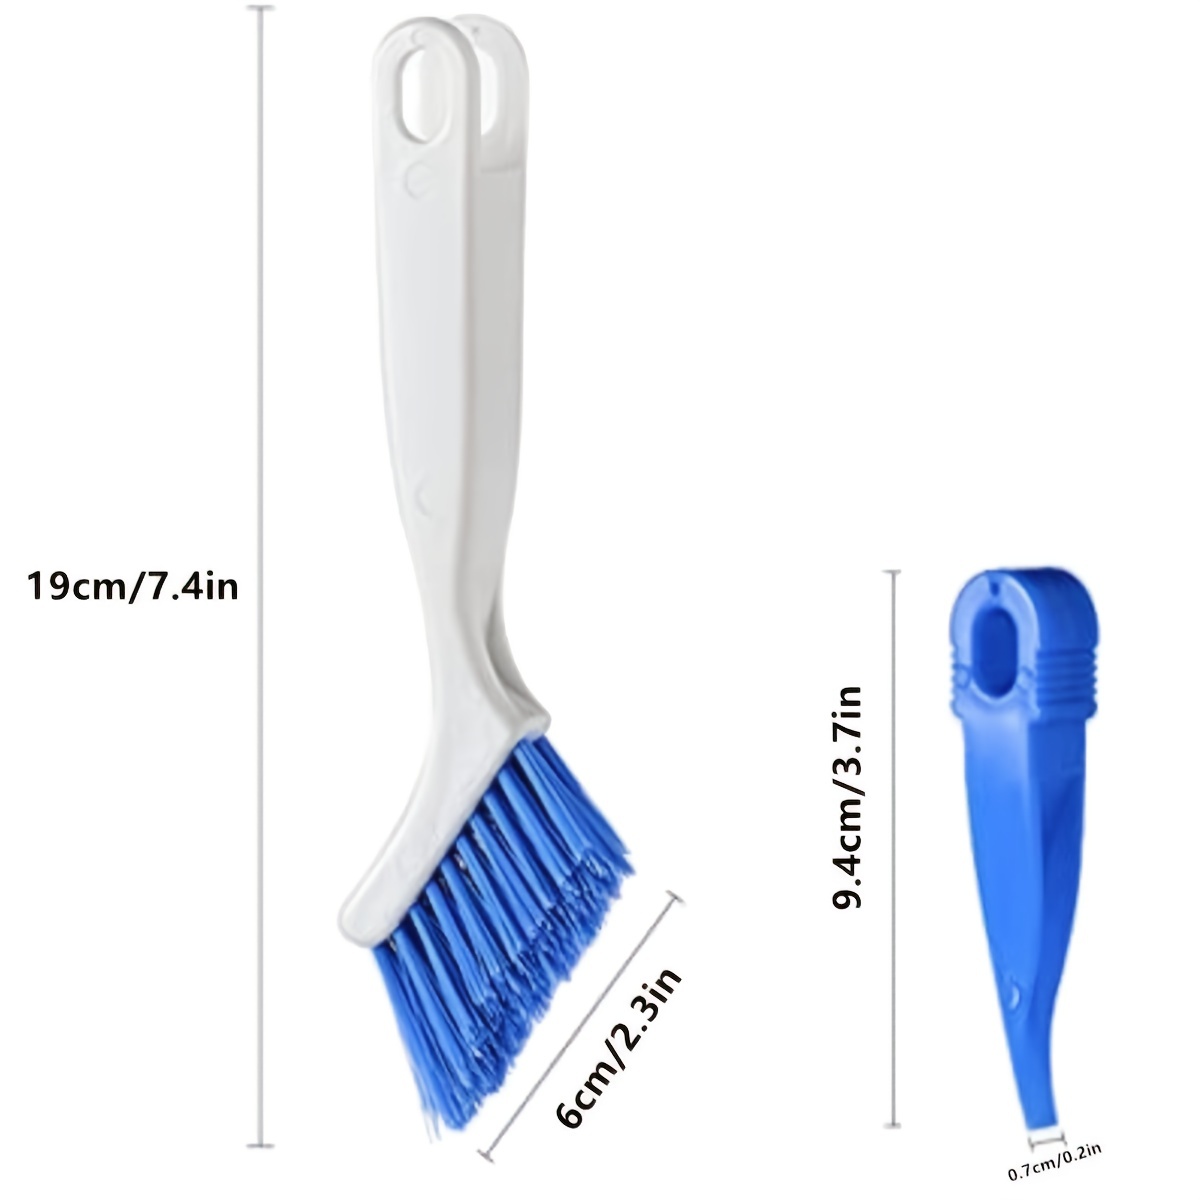  Small Cleaning Brushes for Household Cleaning,Crevice